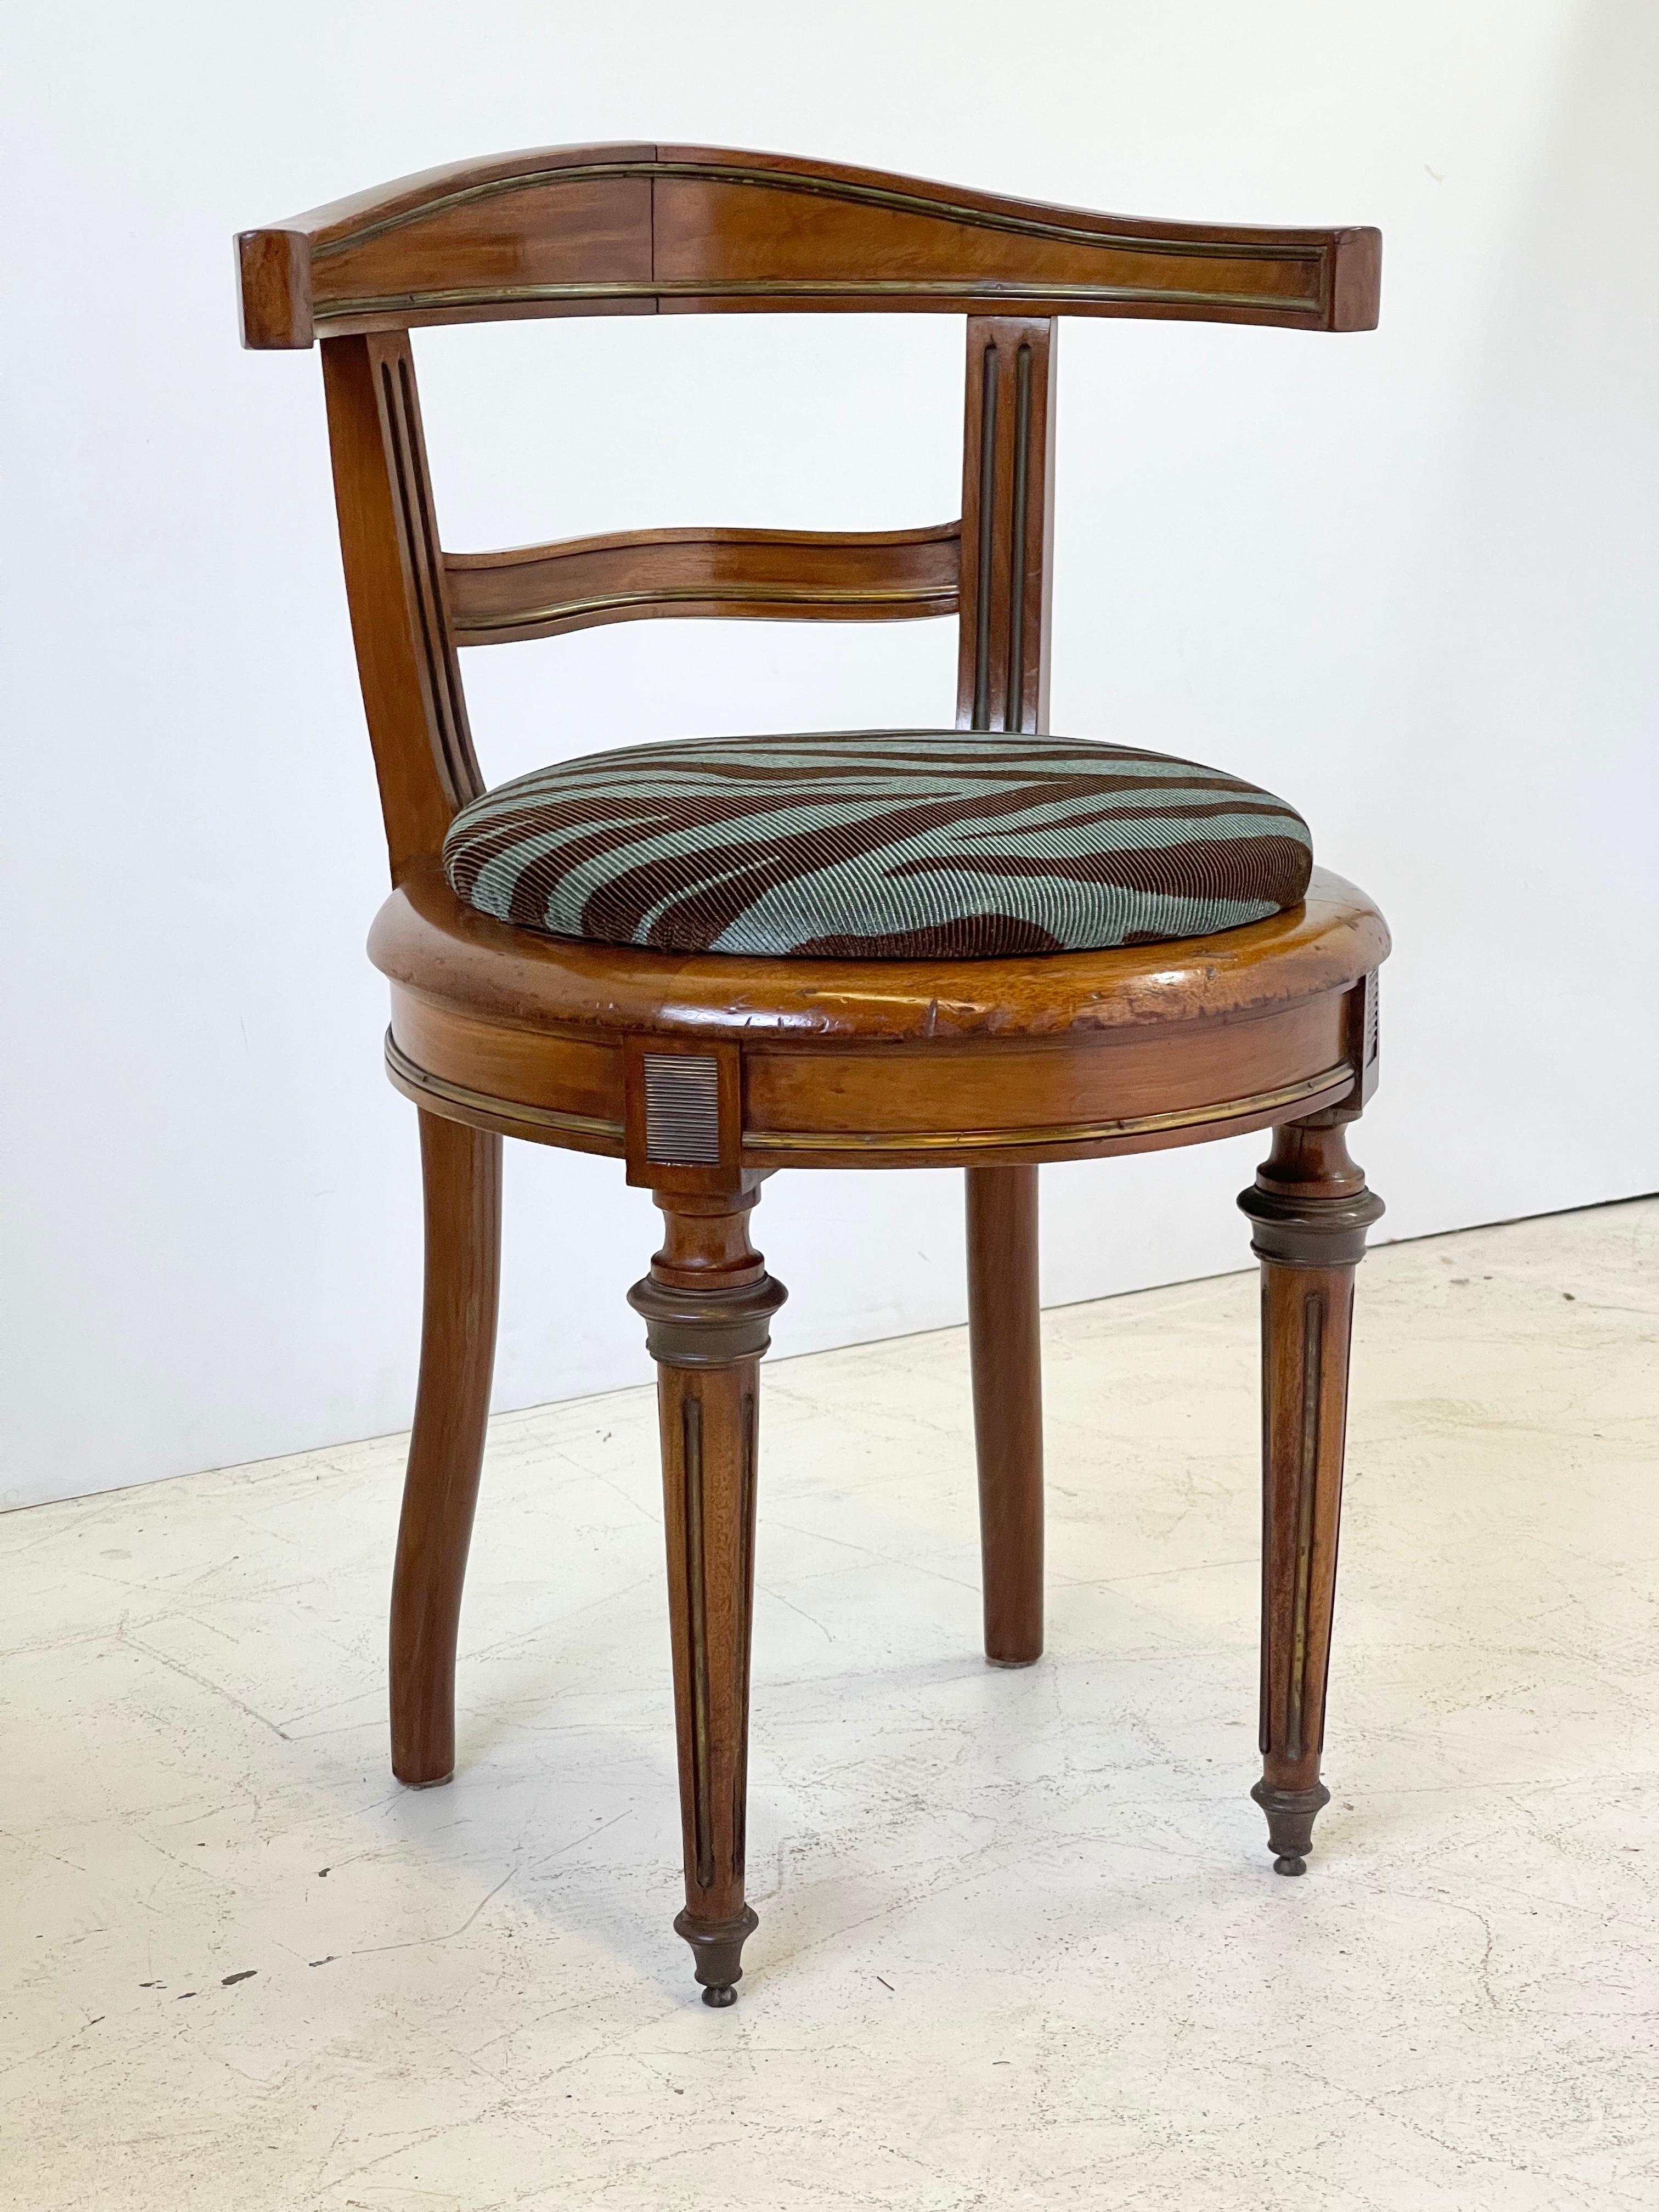 Early 20th century Italian neoclassical vanity chair made of walnut with brass inlay. The round raised seat cushion is covered in a blue and brown ribbed zebra print fabric.